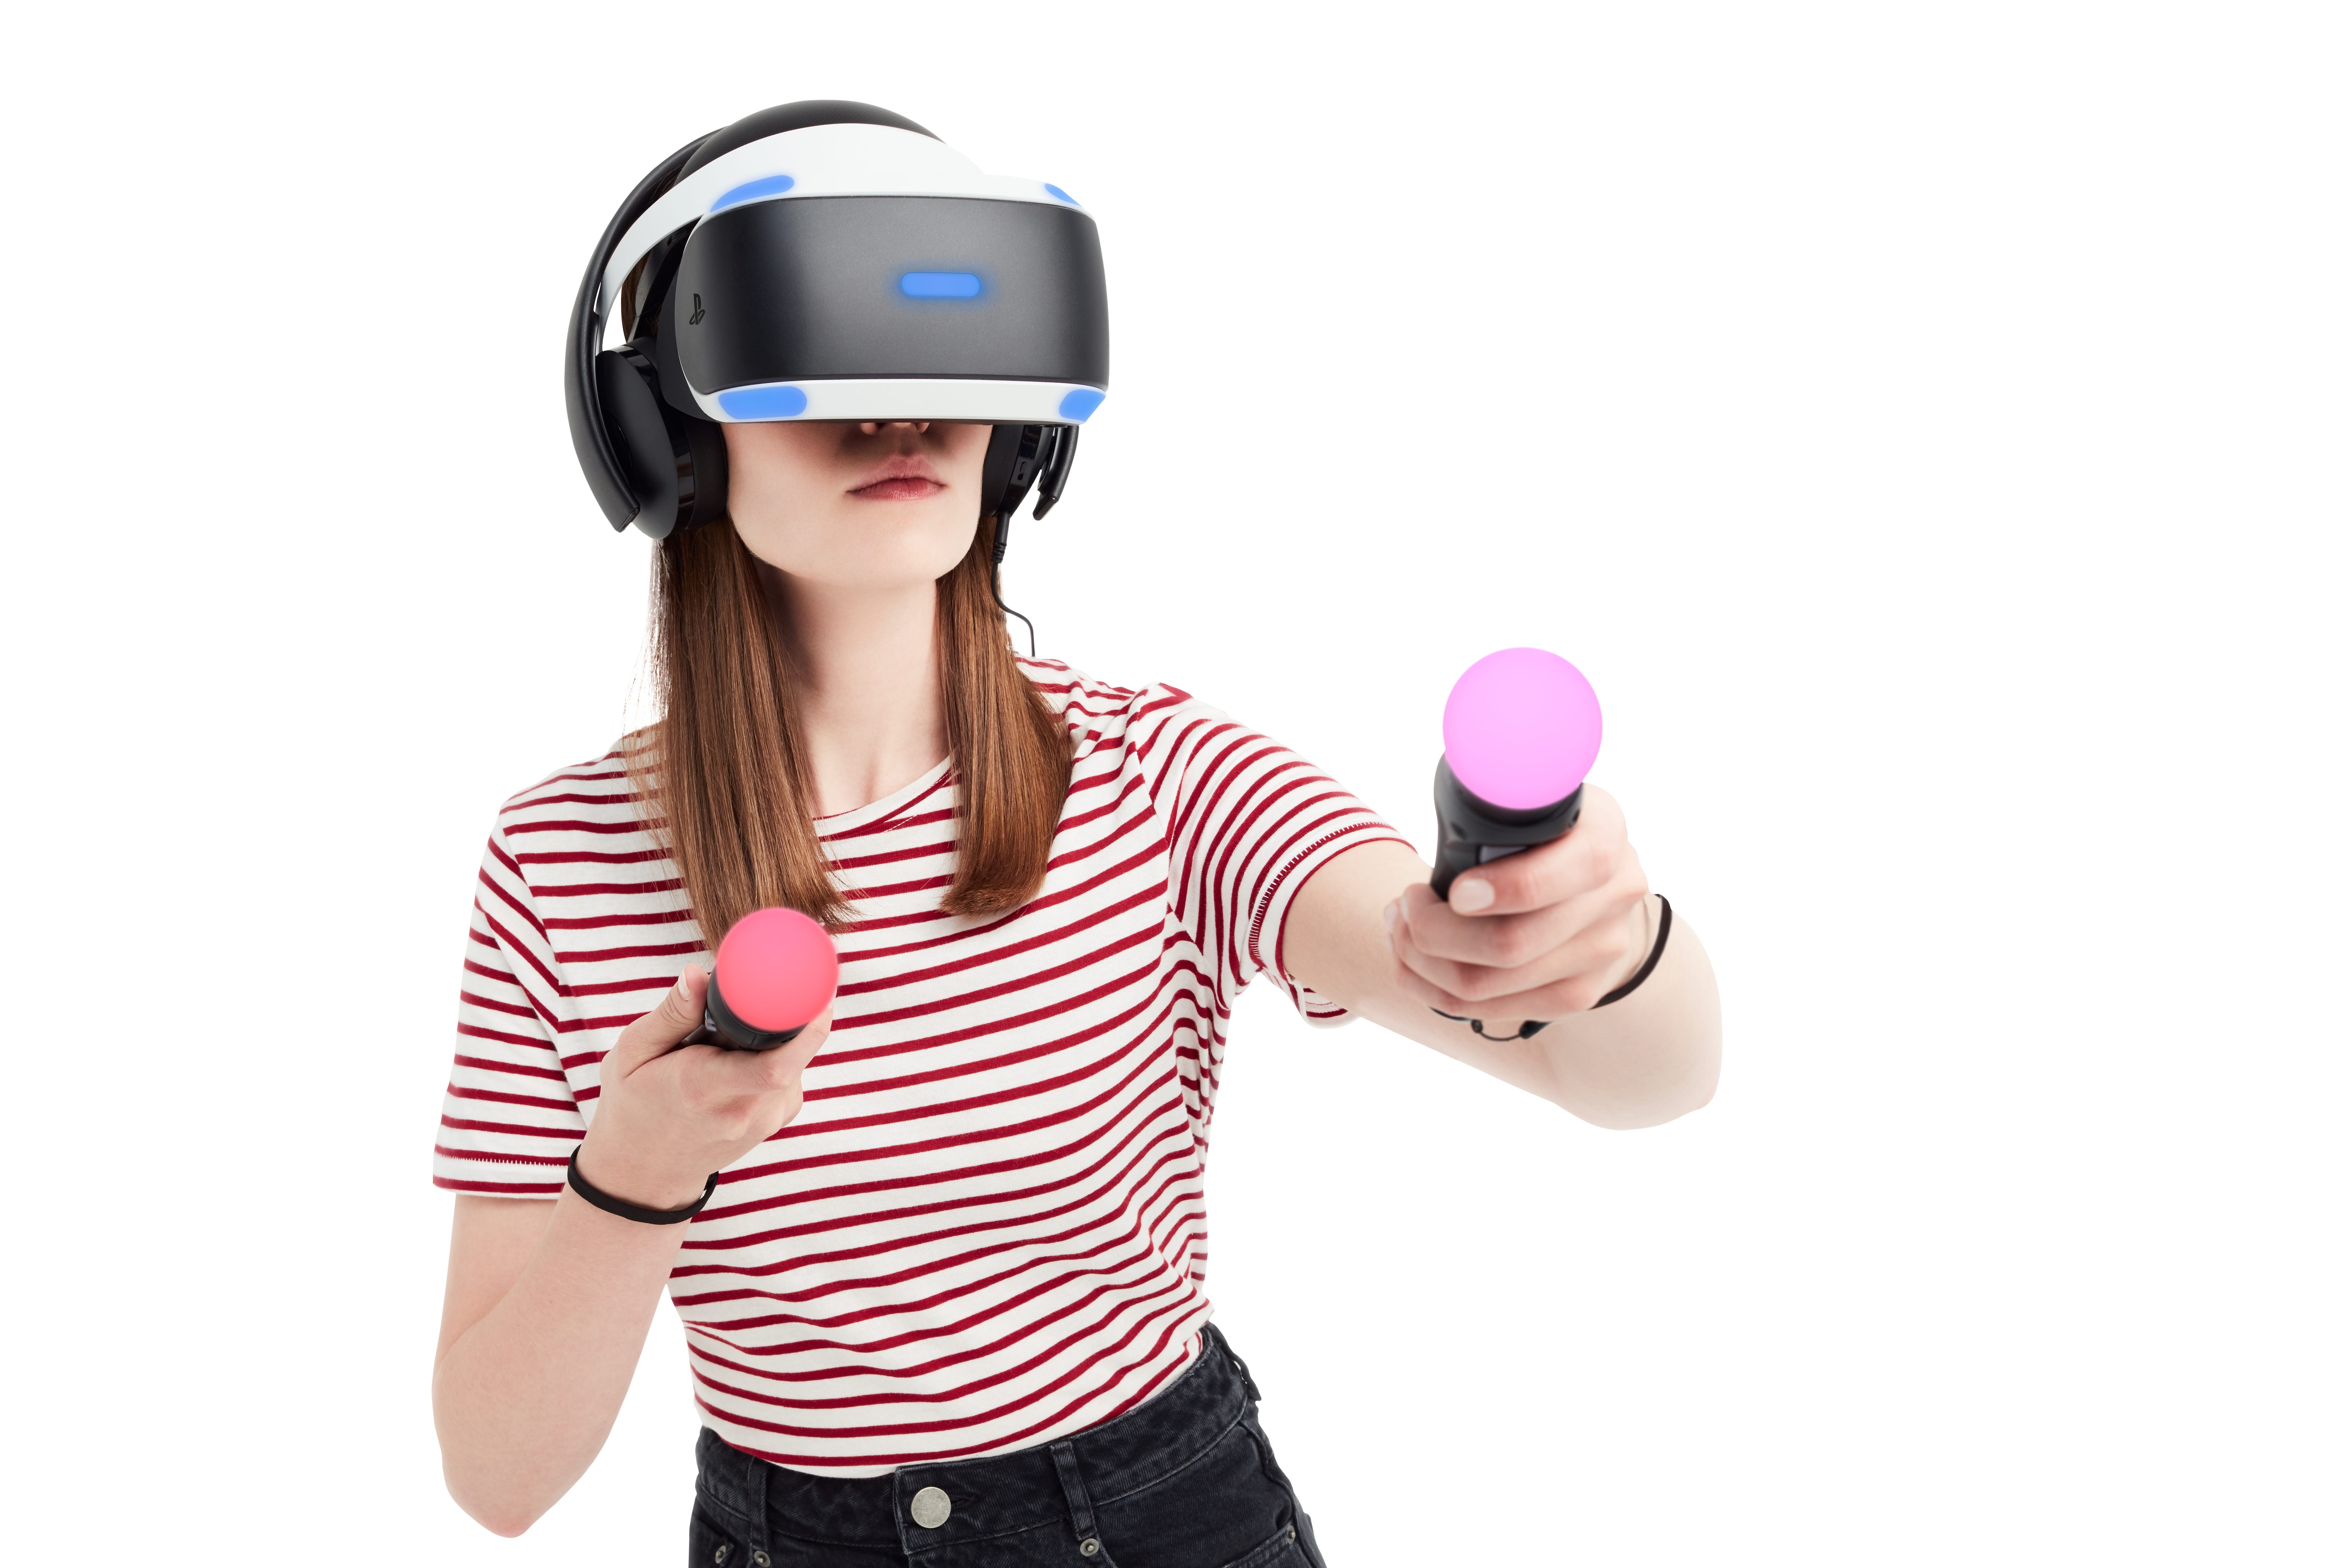 is sony vr worth it